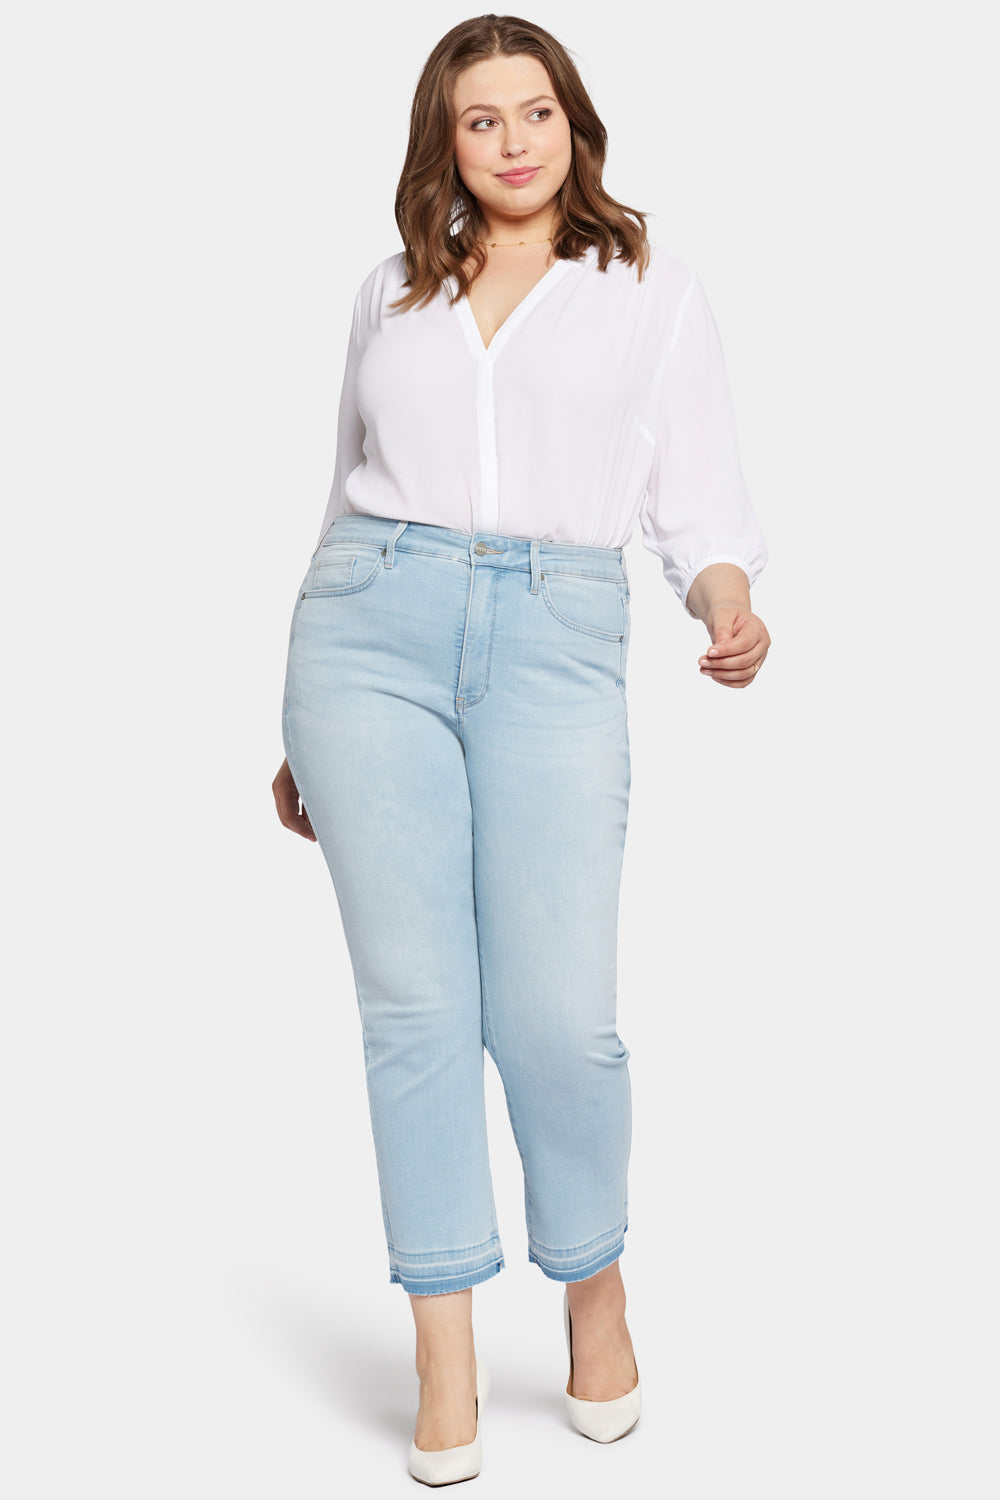 NYDJ Marilyn Straight Ankle Jeans In Plus Size In Cool Embrace® Denim With High Rise And Released Hems - Brightside